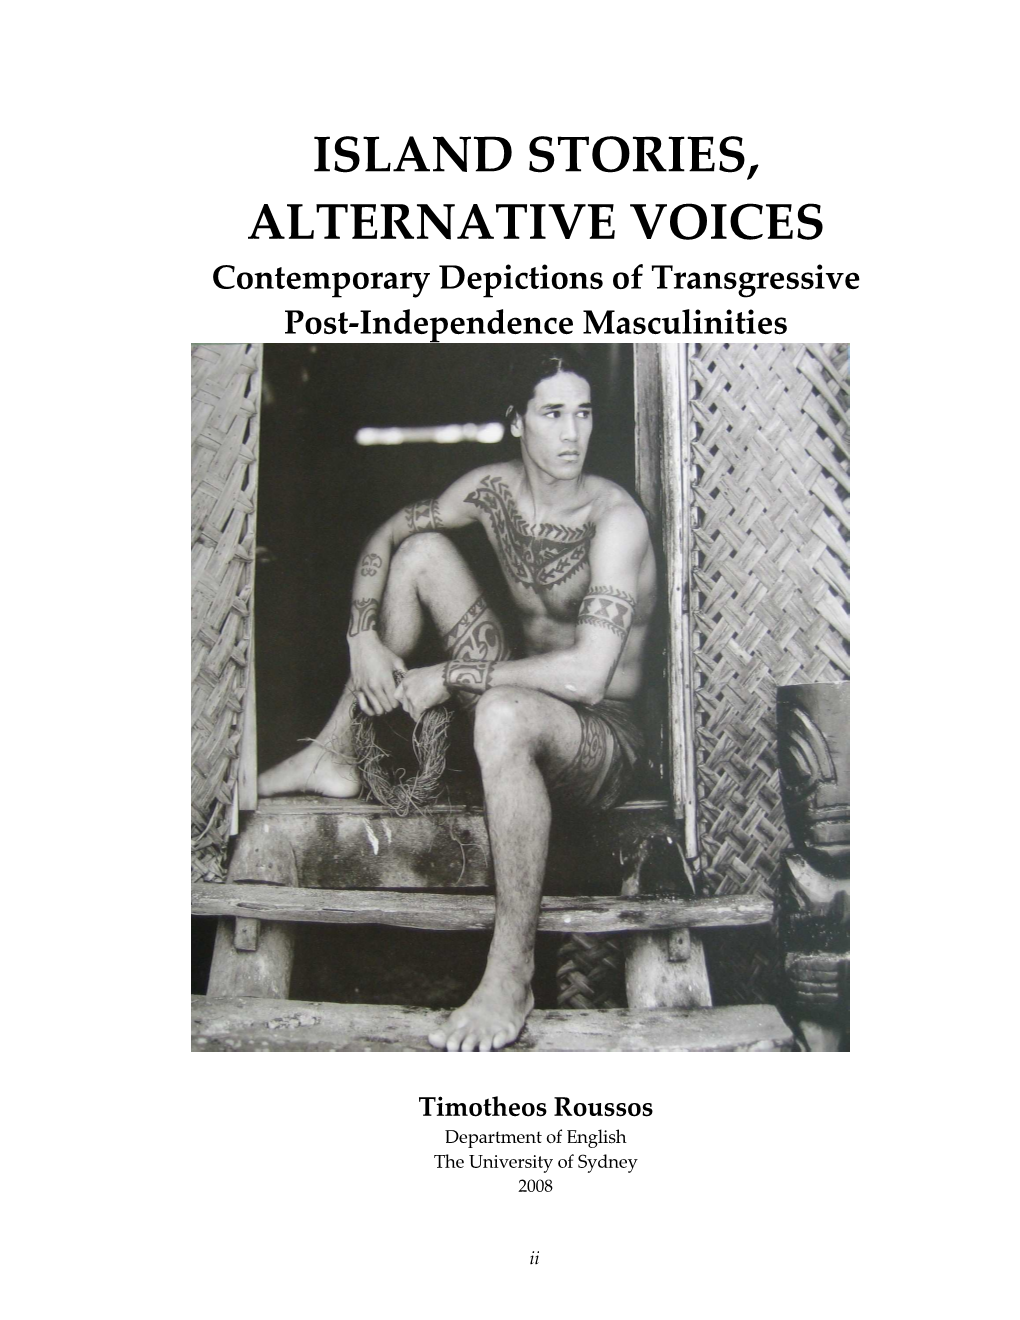 ISLAND STORIES, ALTERNATIVE VOICES Contemporary Depictions of Transgressive Post-Independence Masculinities